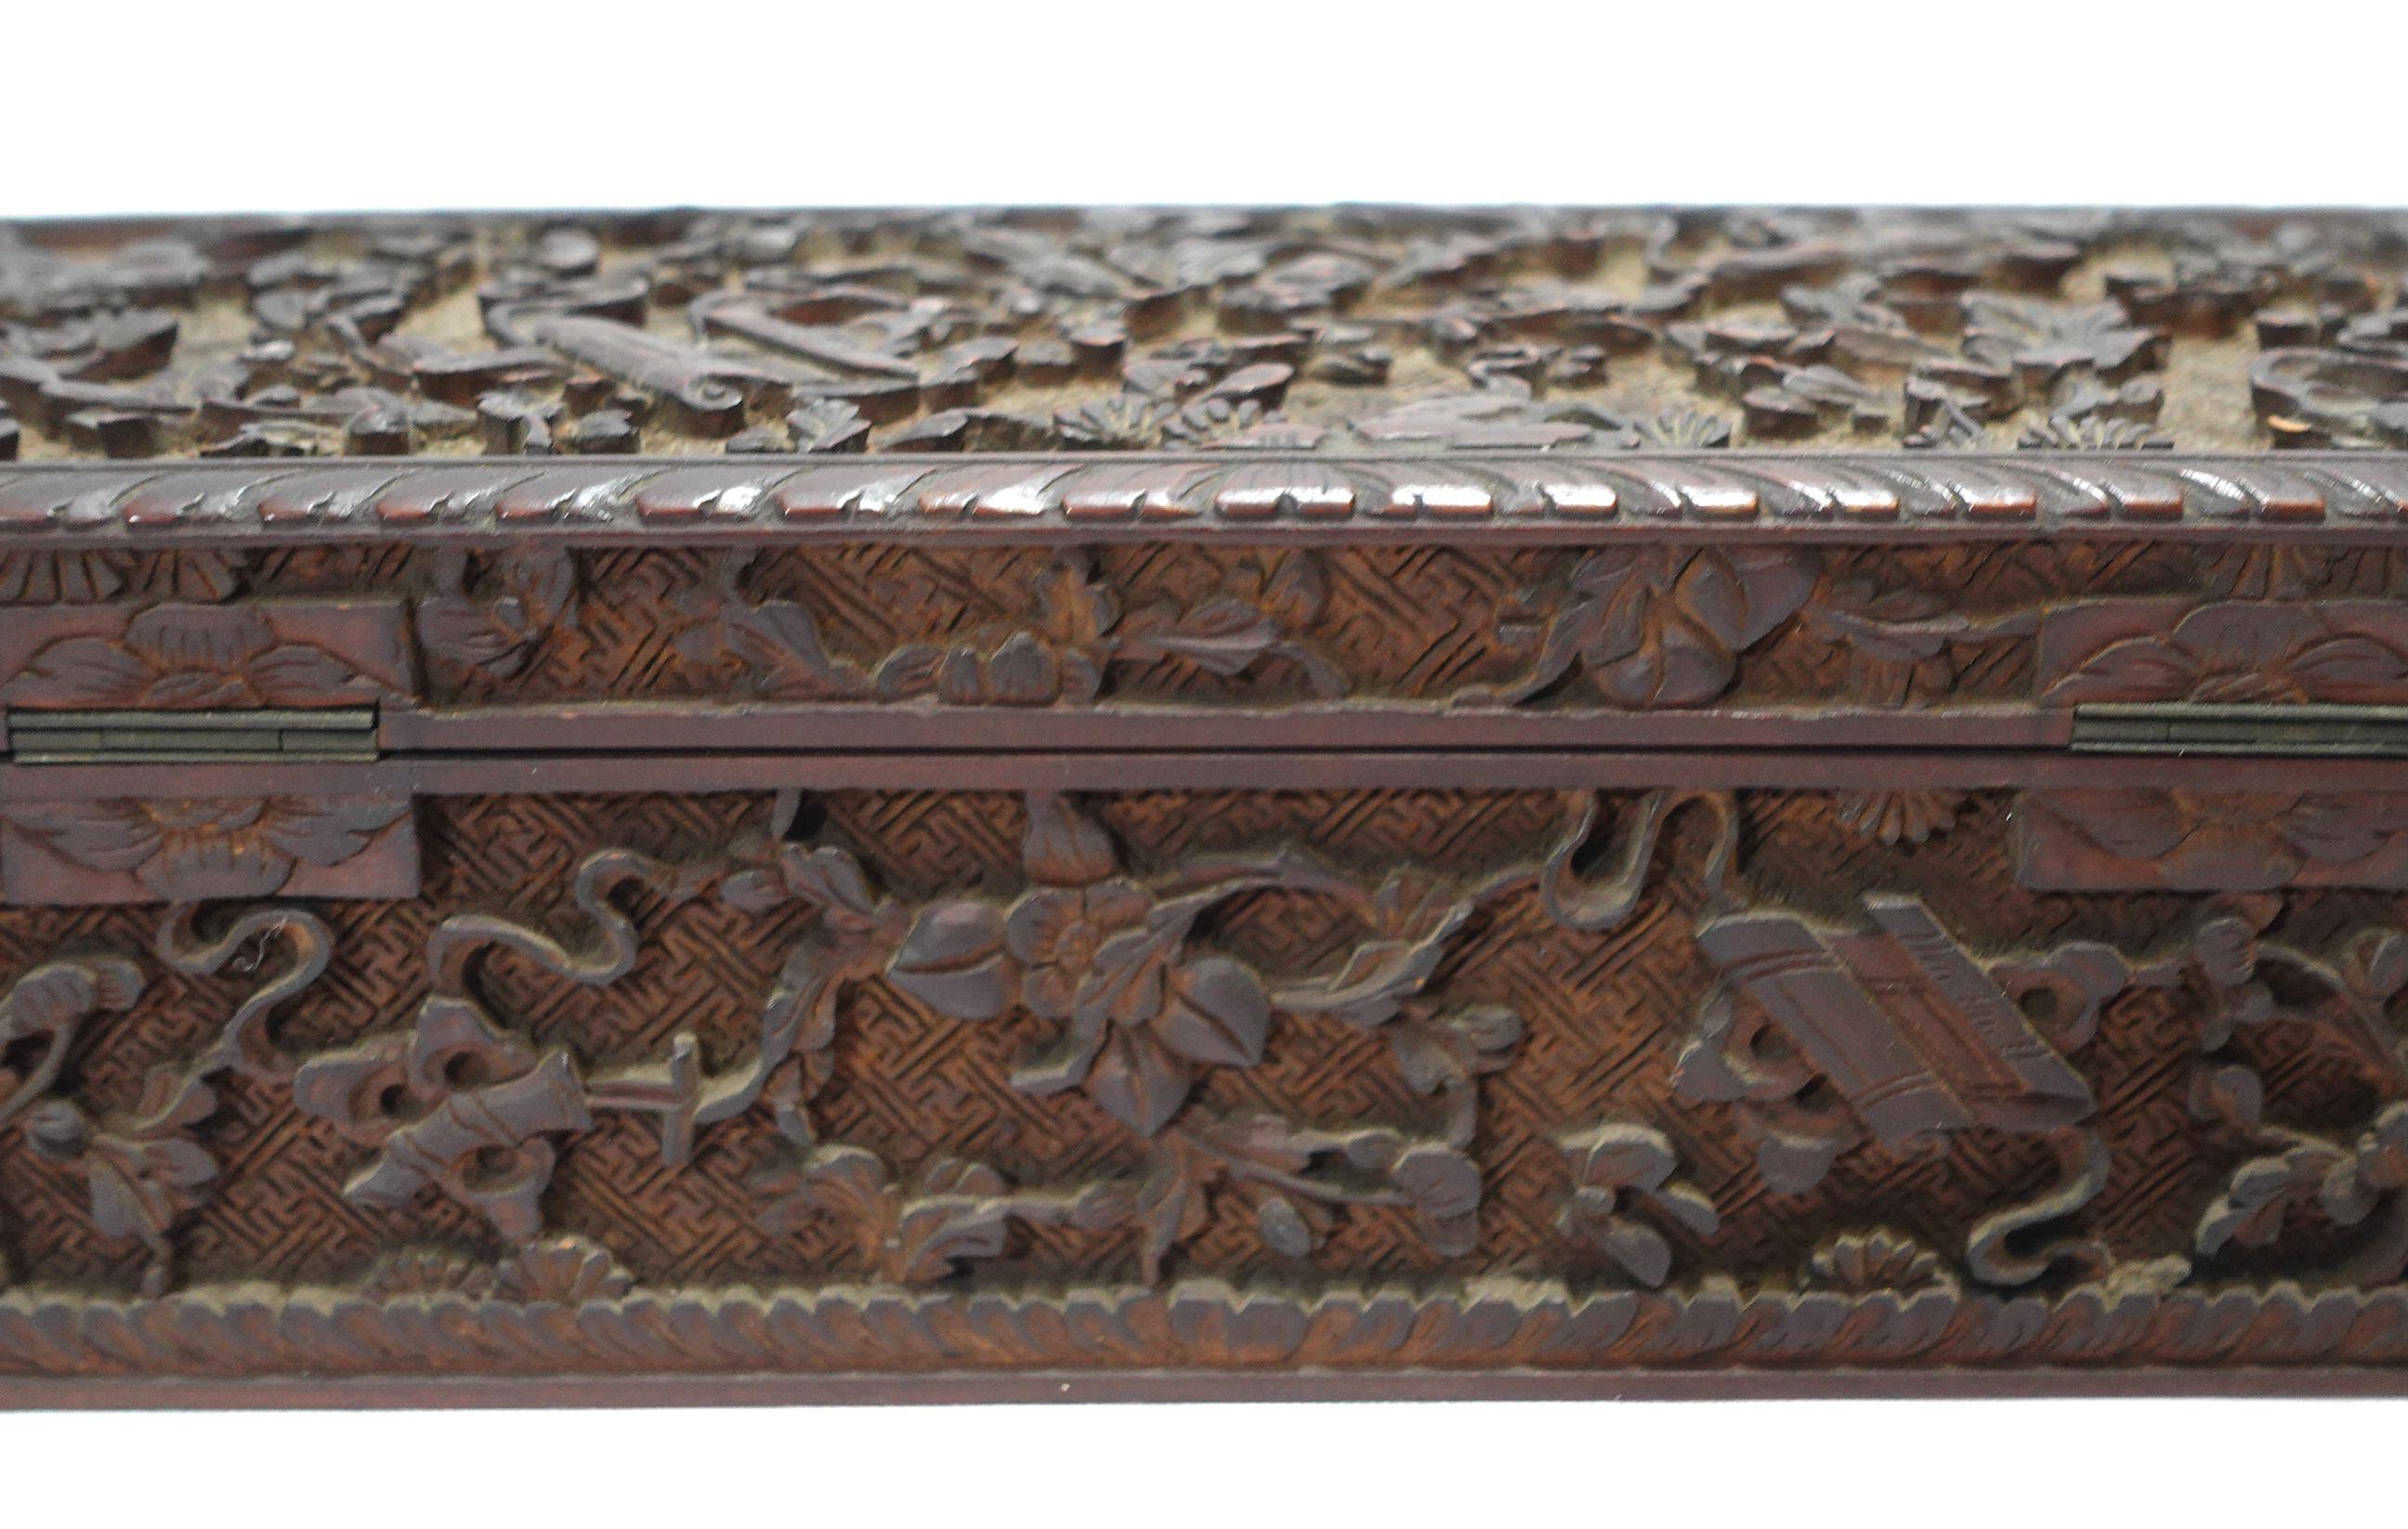 Antique Chinese Elaborately Relief Carved Glove Box W/ Original Hinges and Lock For Sale 7